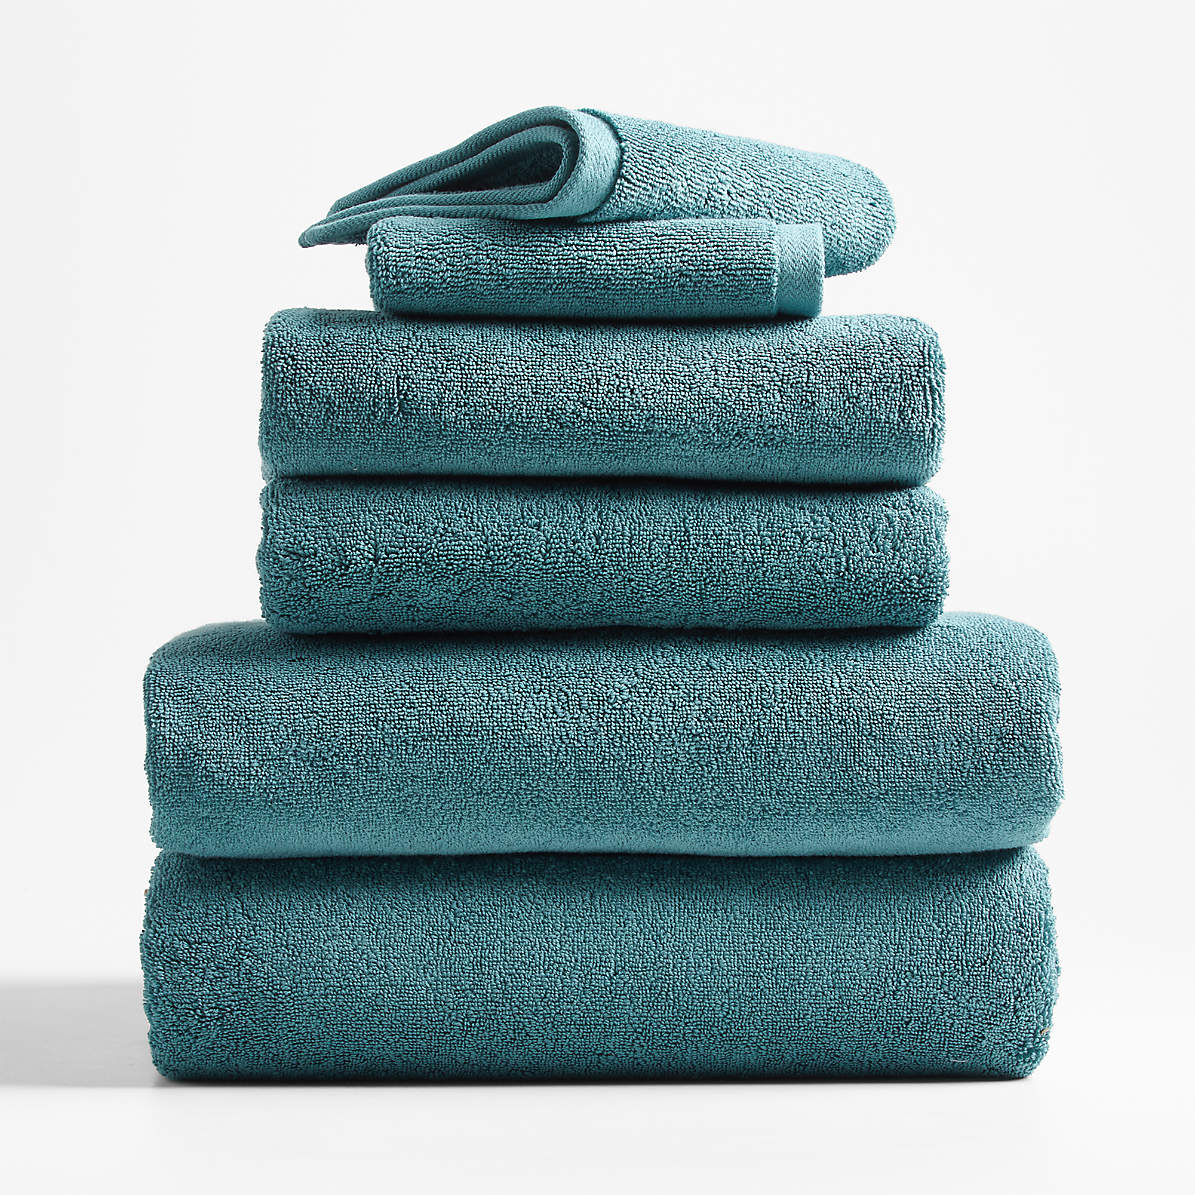 Hotel Style Turkish Cotton Bath Towel Collection Solid Print Teal